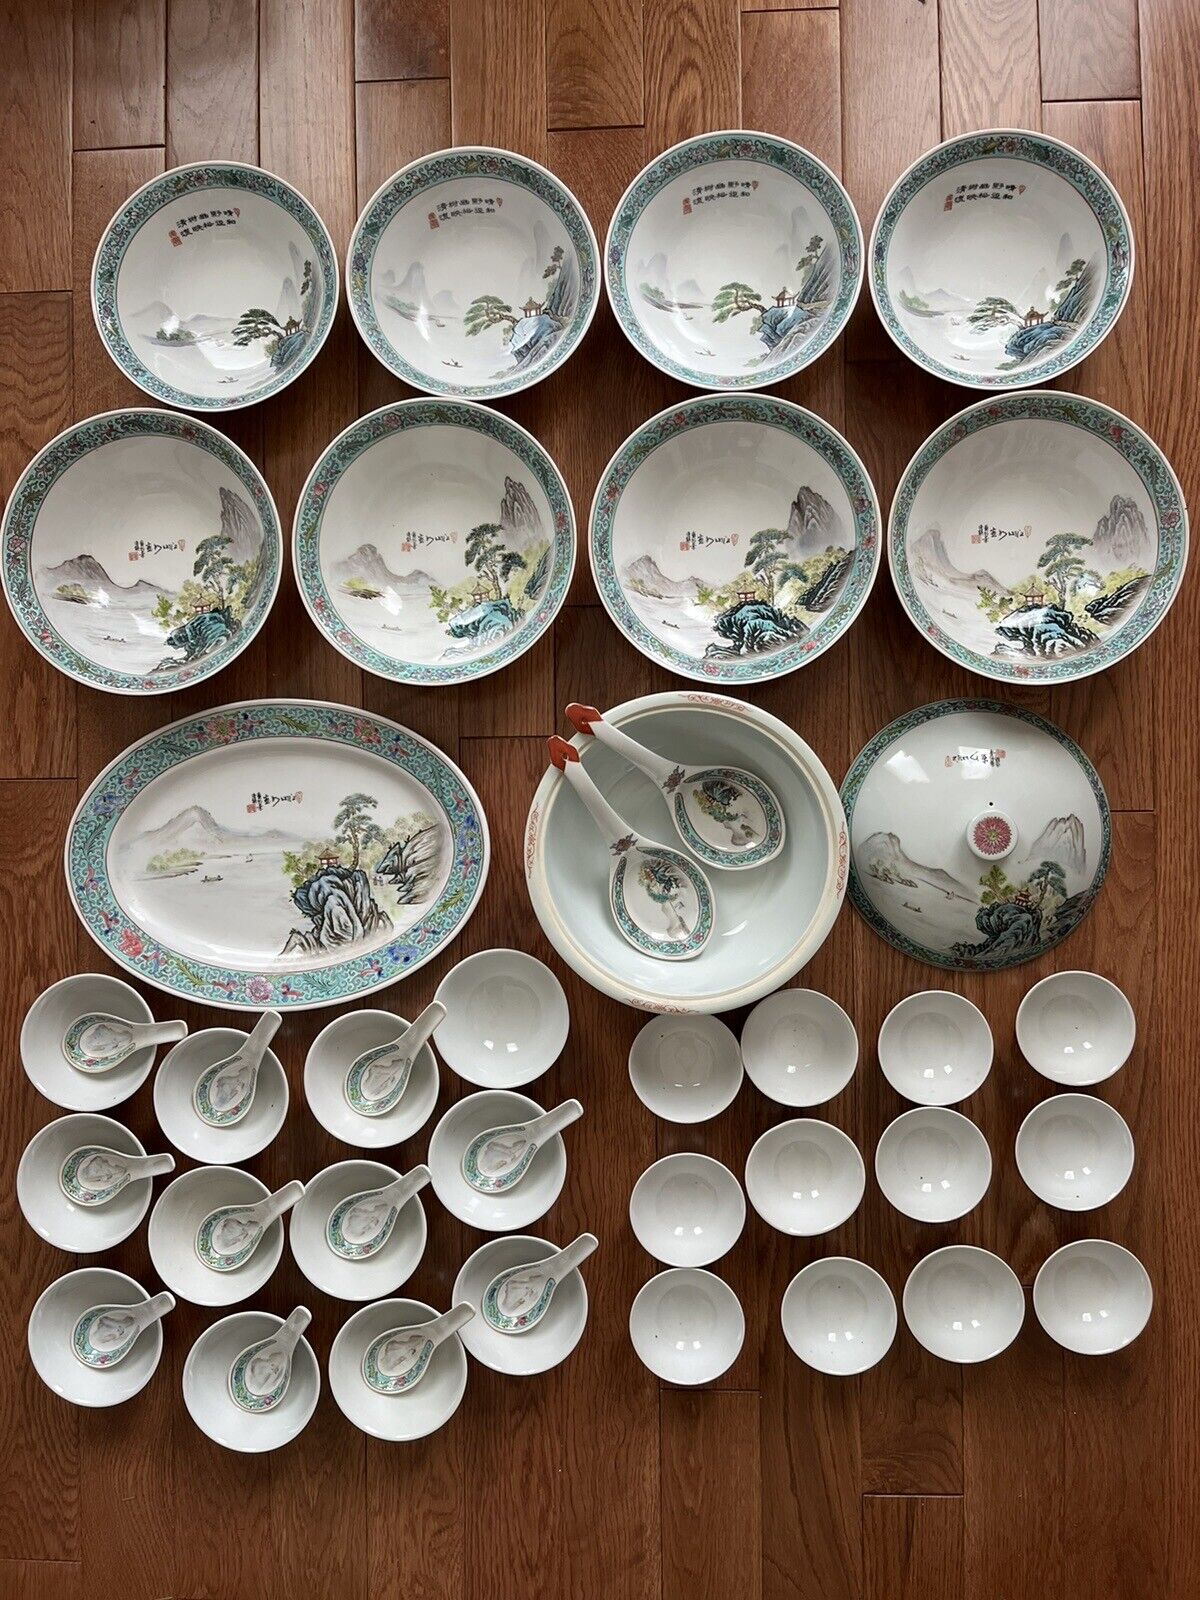 Rare Vtg 1960s Chinese Jingdezhen Handpainted Dishes set of 48 Mountain by Water